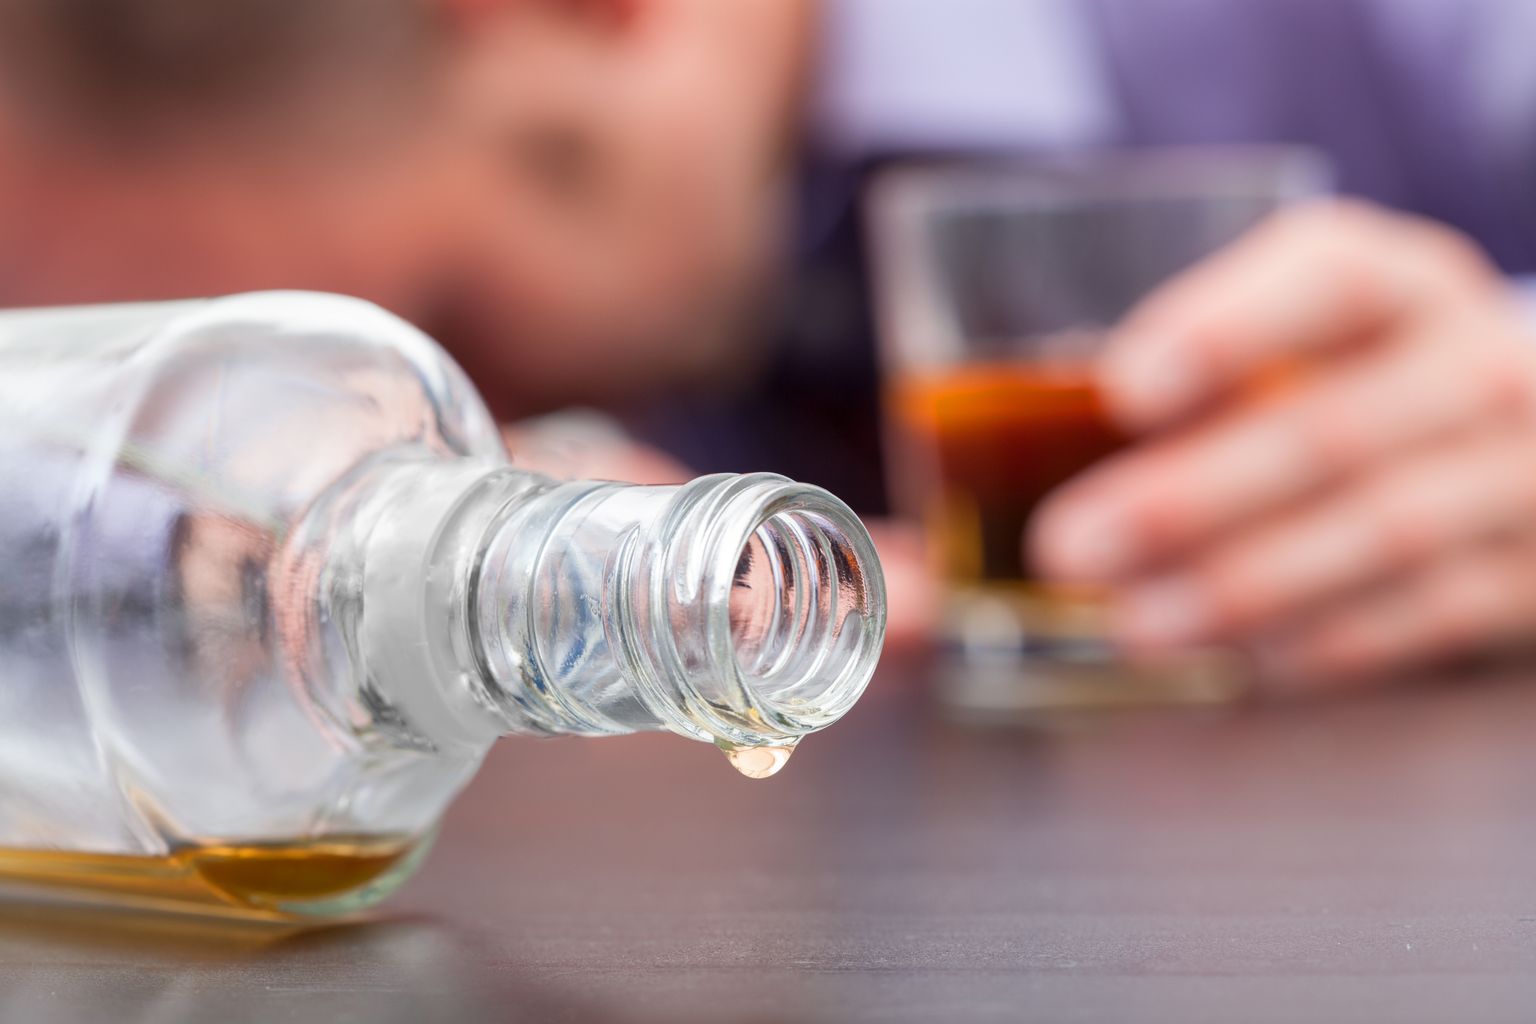 Close-up of a fallen, almost empty whiskey bottle with a sleeping person with half-full whiskey glass in the background.